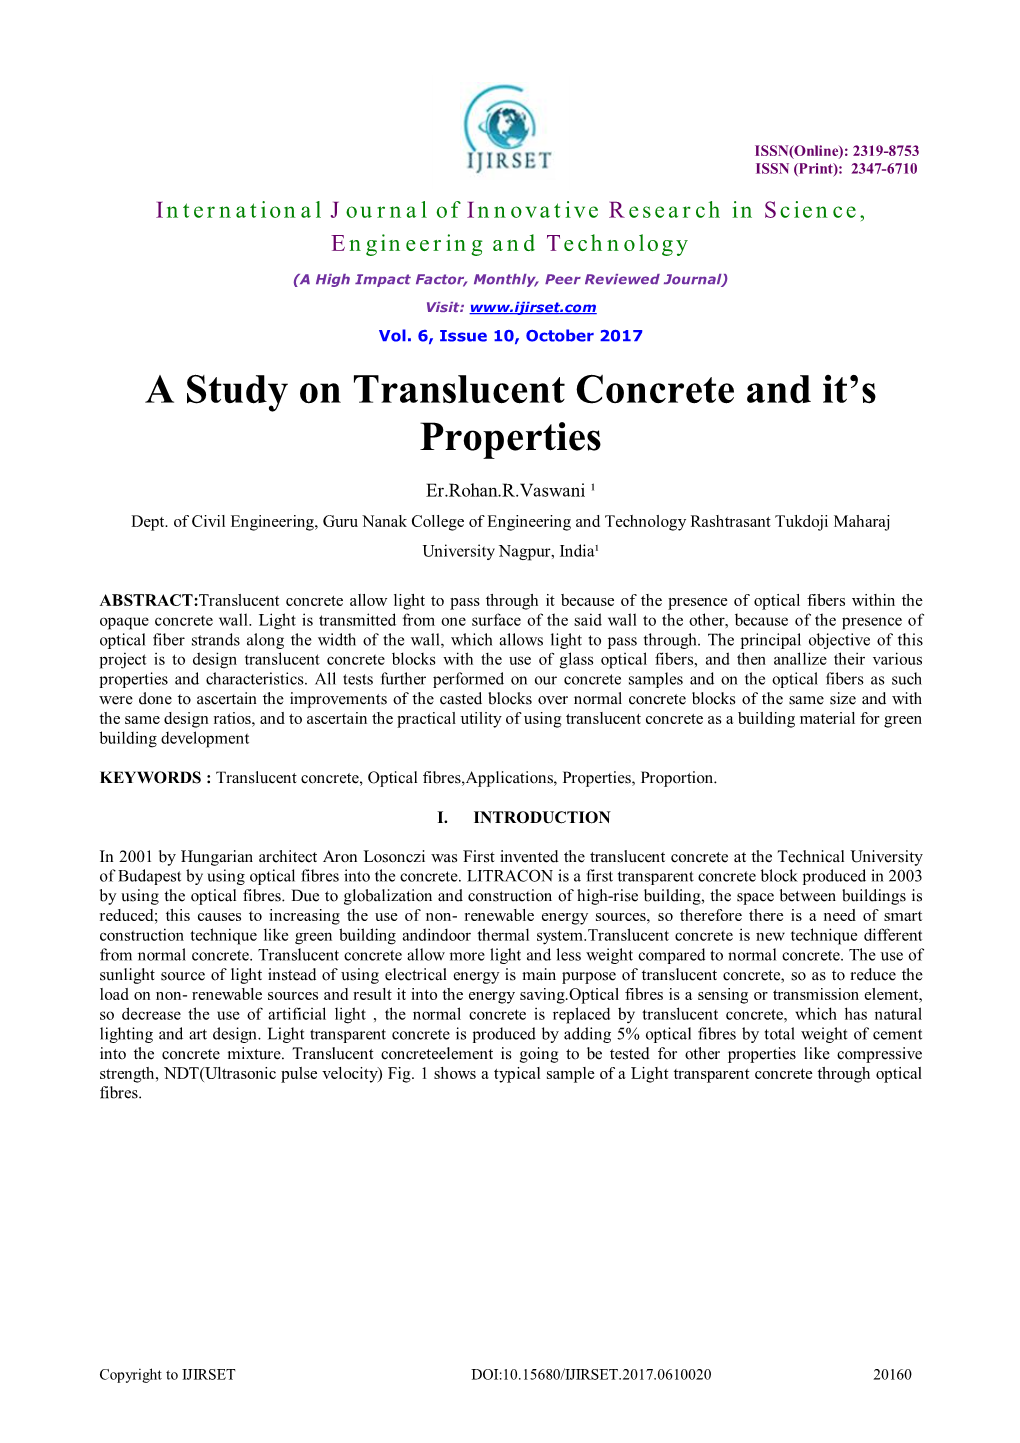 A Study on Translucent Concrete and It's Properties